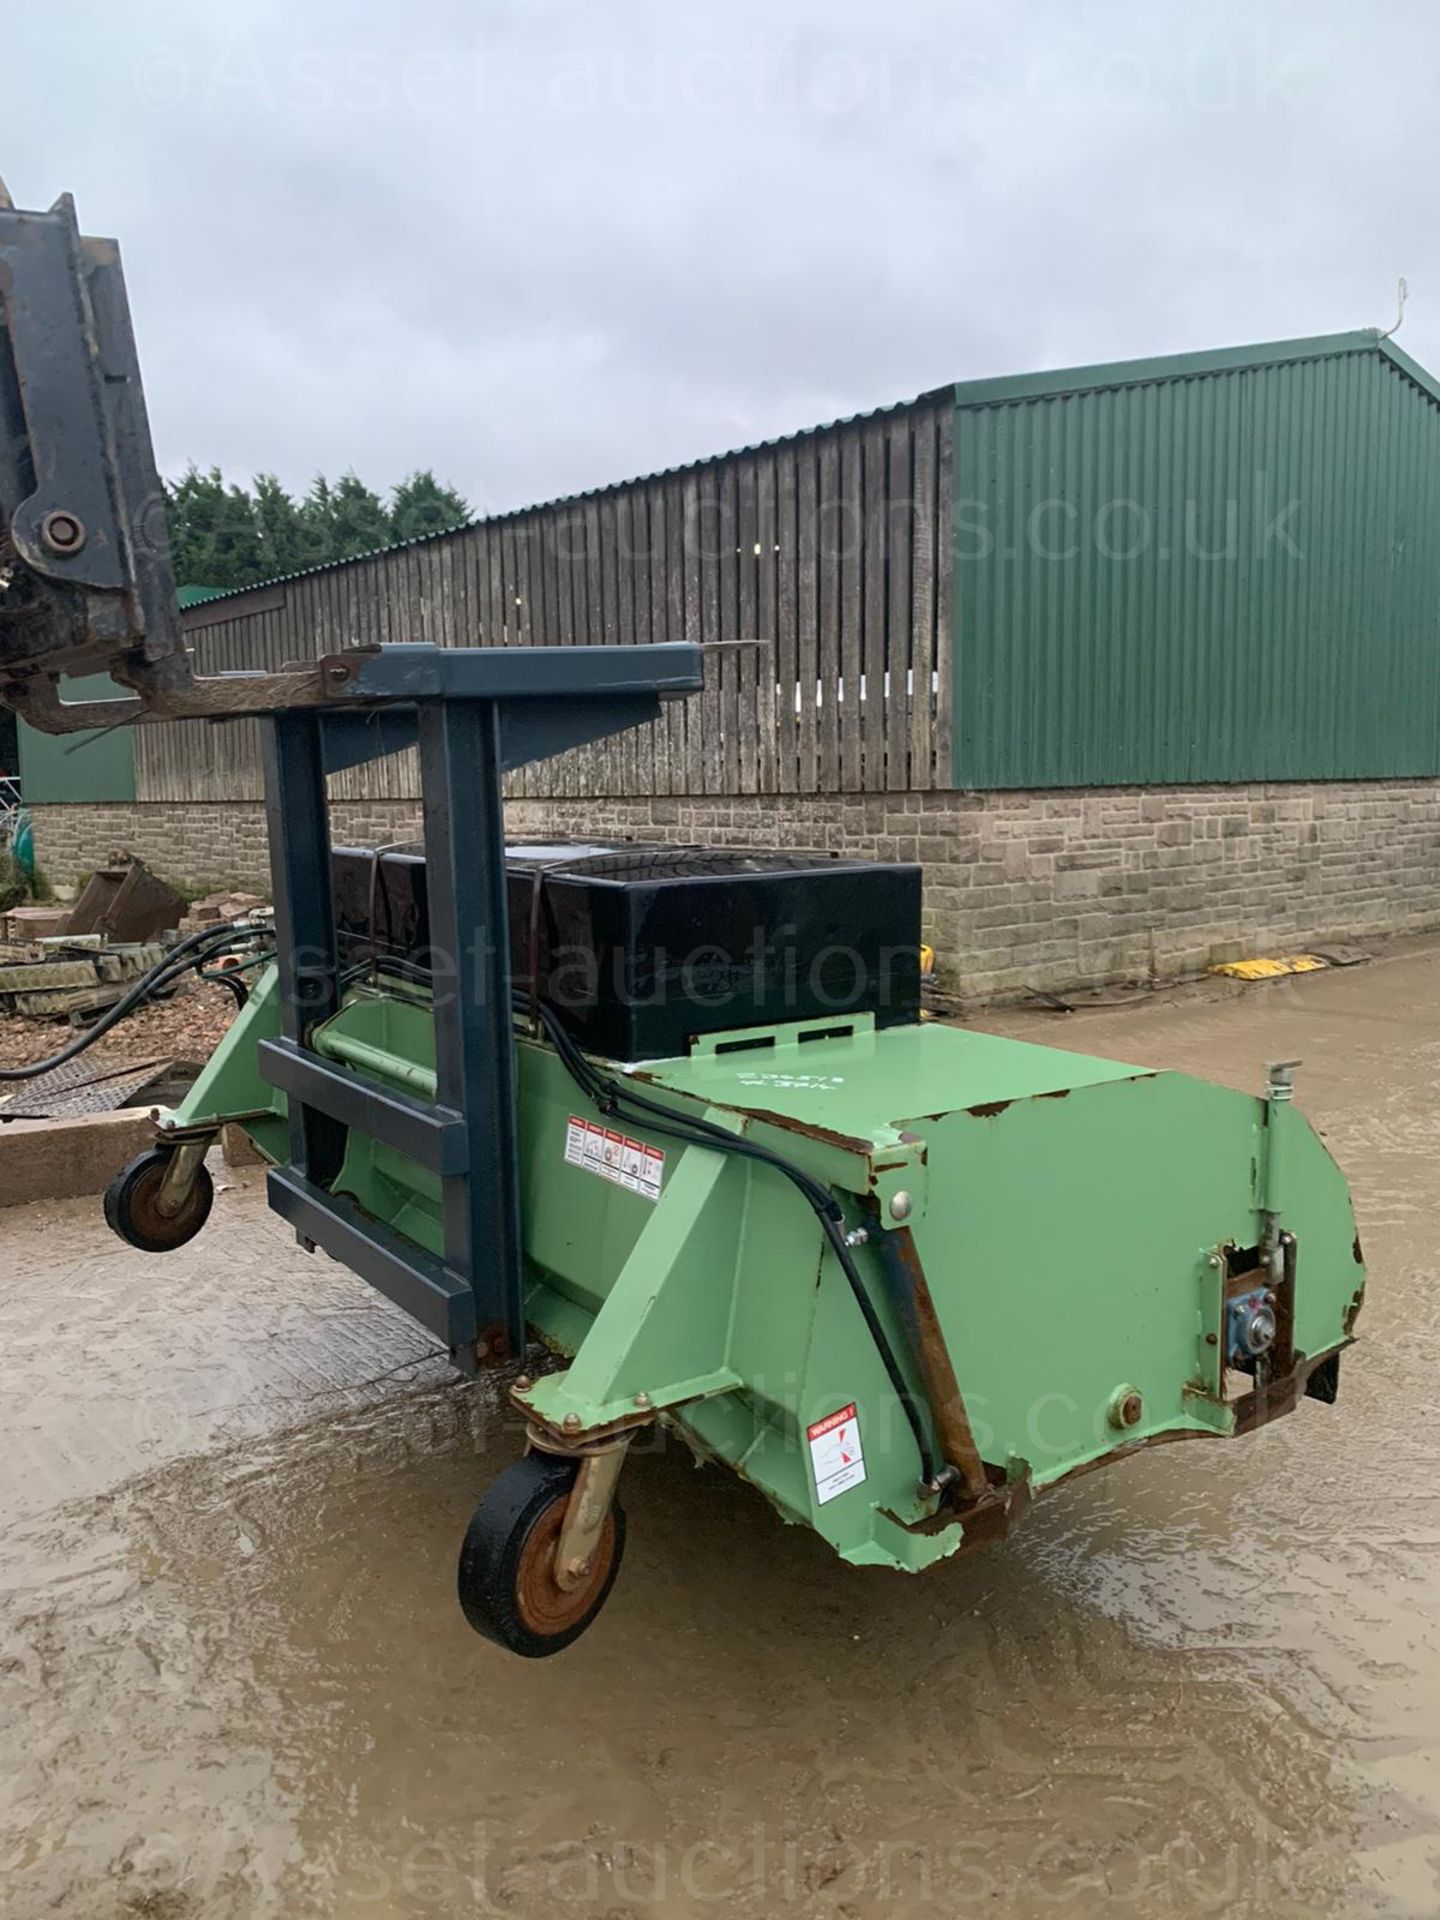 DMX SWEEPER SOLUTION SWEEPER BUCKET, ALL WORKS, HYDRAULIC DRIVEN, SUITABLE FOR PALLET FORKS - Image 5 of 6